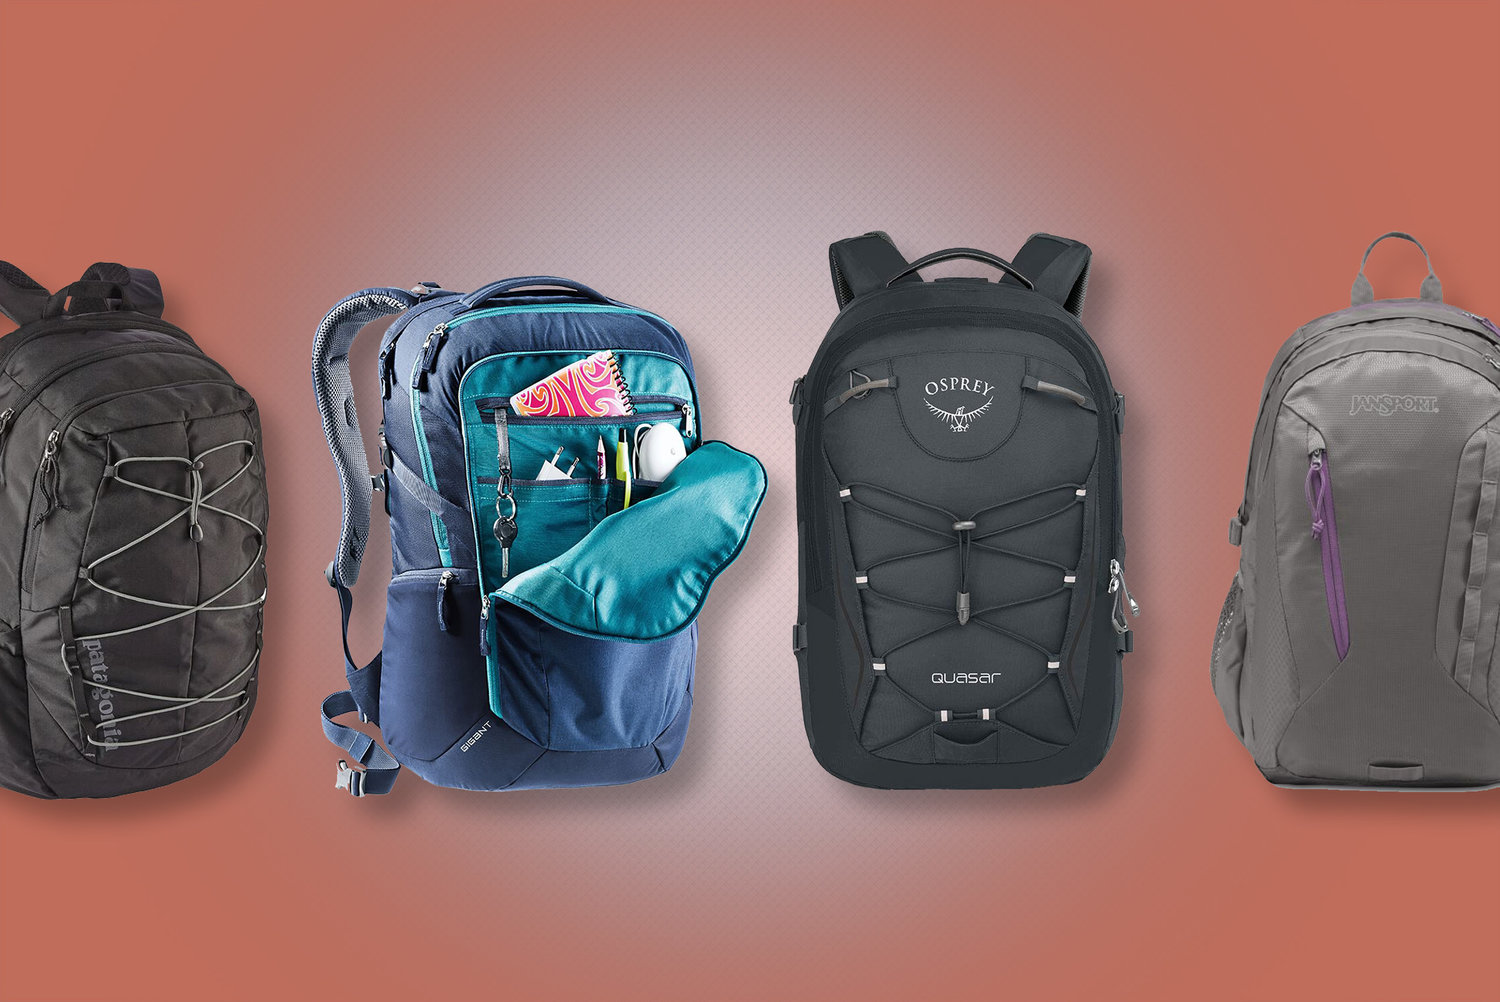 11 Backpacks Like North Face You Should Check Out | Backpackies